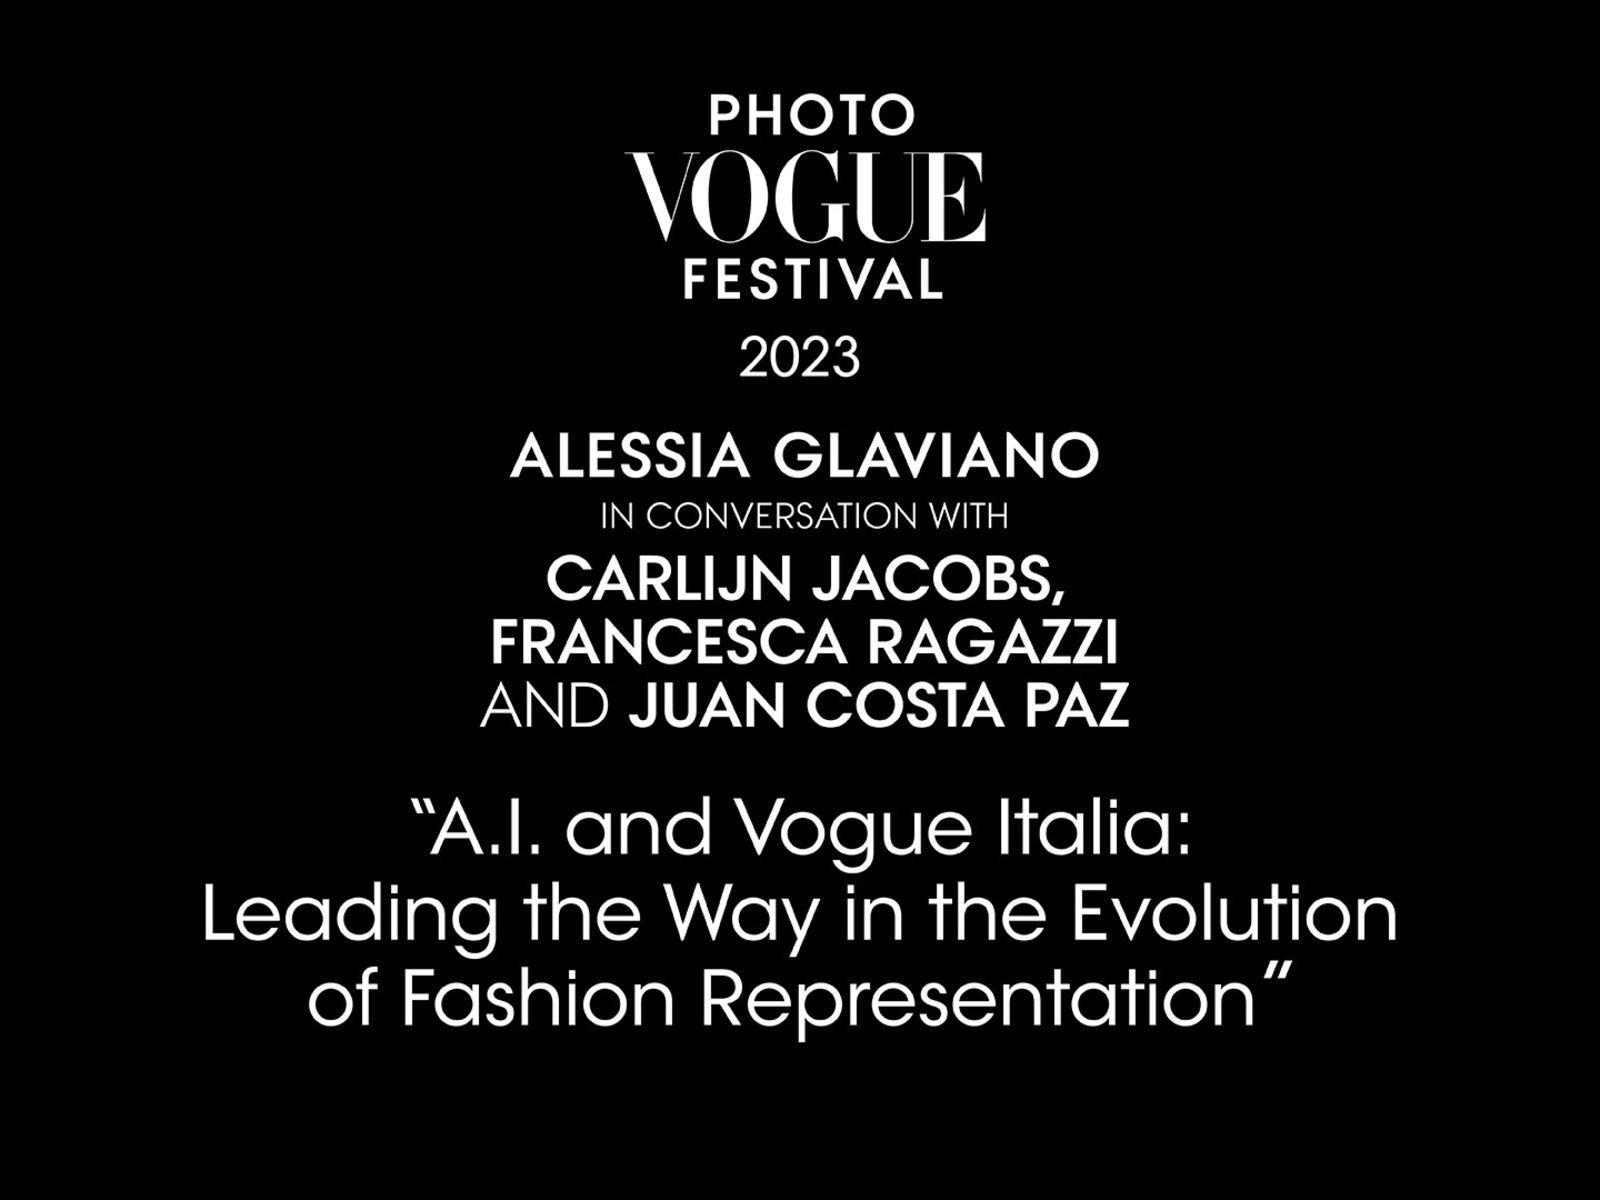 A.I. and Vogue Italia: Leading the Way in the Evolution of Fashion Representation | PhotoVogue Festival 2023: What Makes Us Human? Image in the Age of A.I.